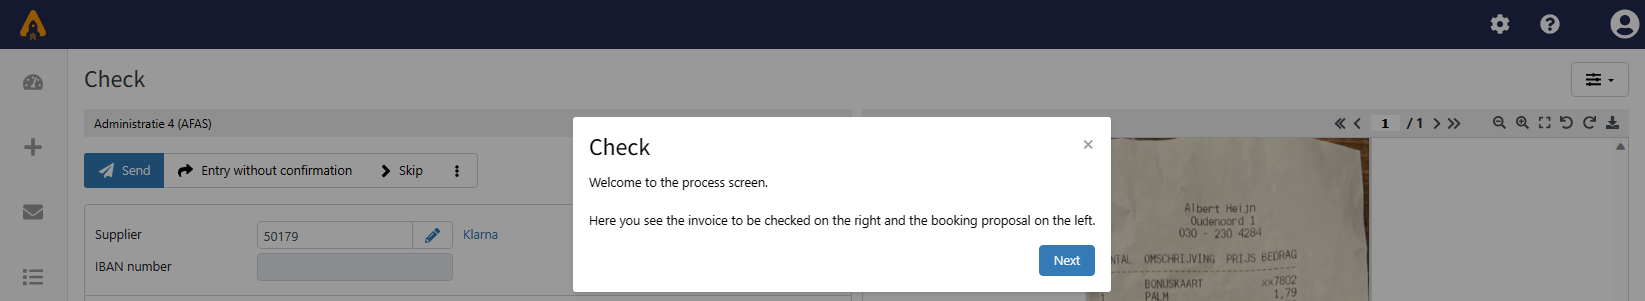 An example tutorial screen with the following message: "Check. Welcome to the process screen. Here you see the invoice to be checked on the right and the bookingproposal on the left."